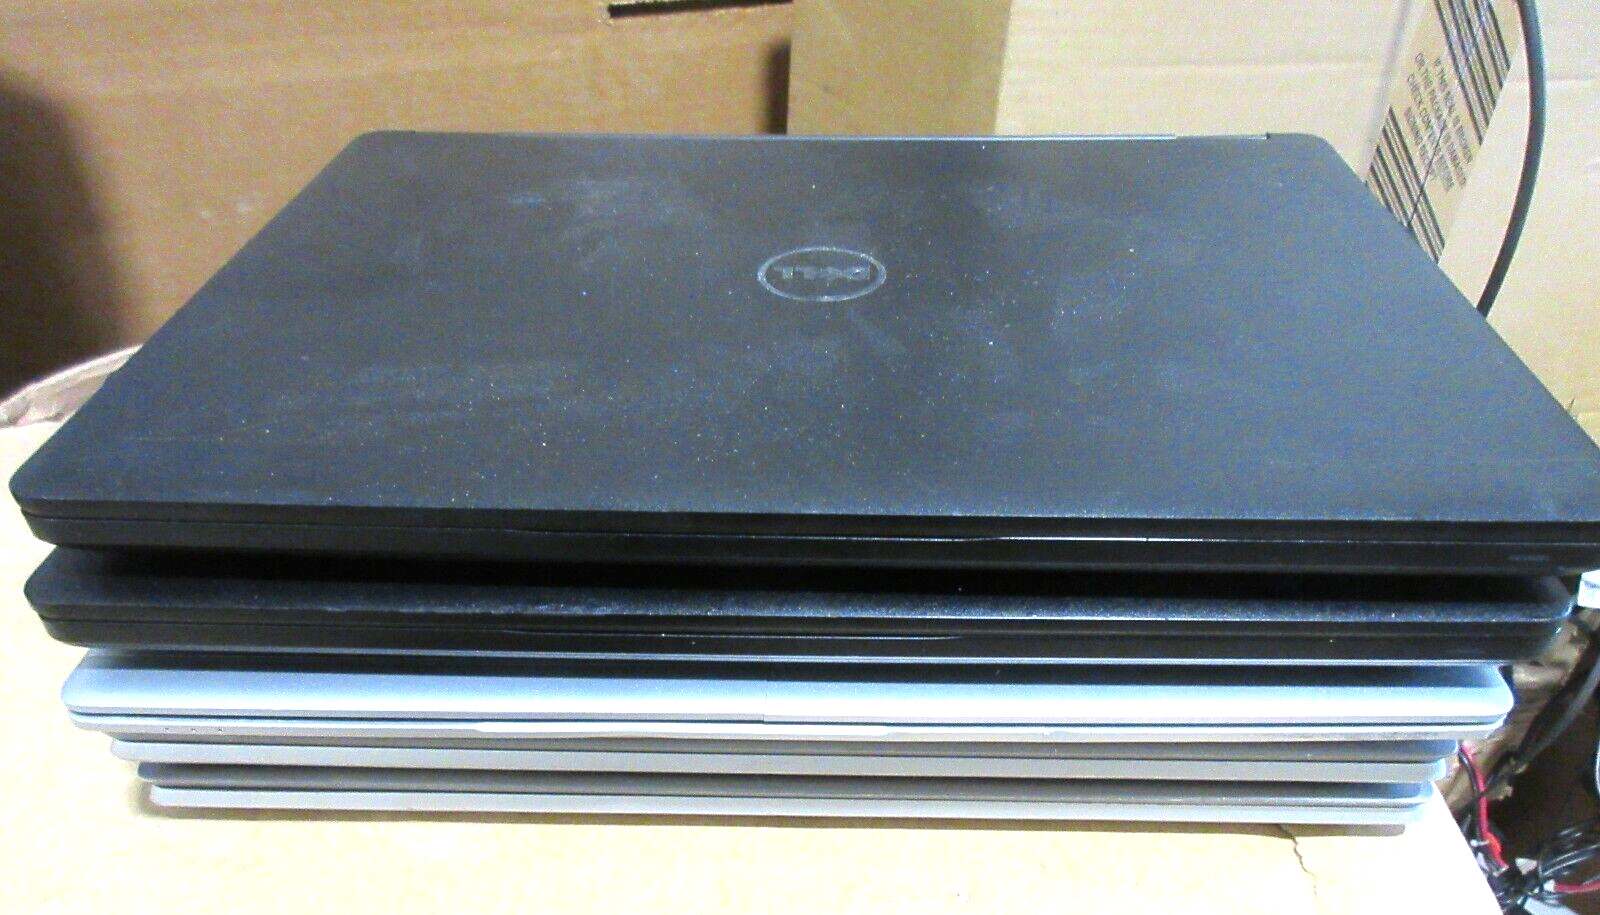 lot of (5) HP & Dell mixed laptop lot 6th & 8th gen